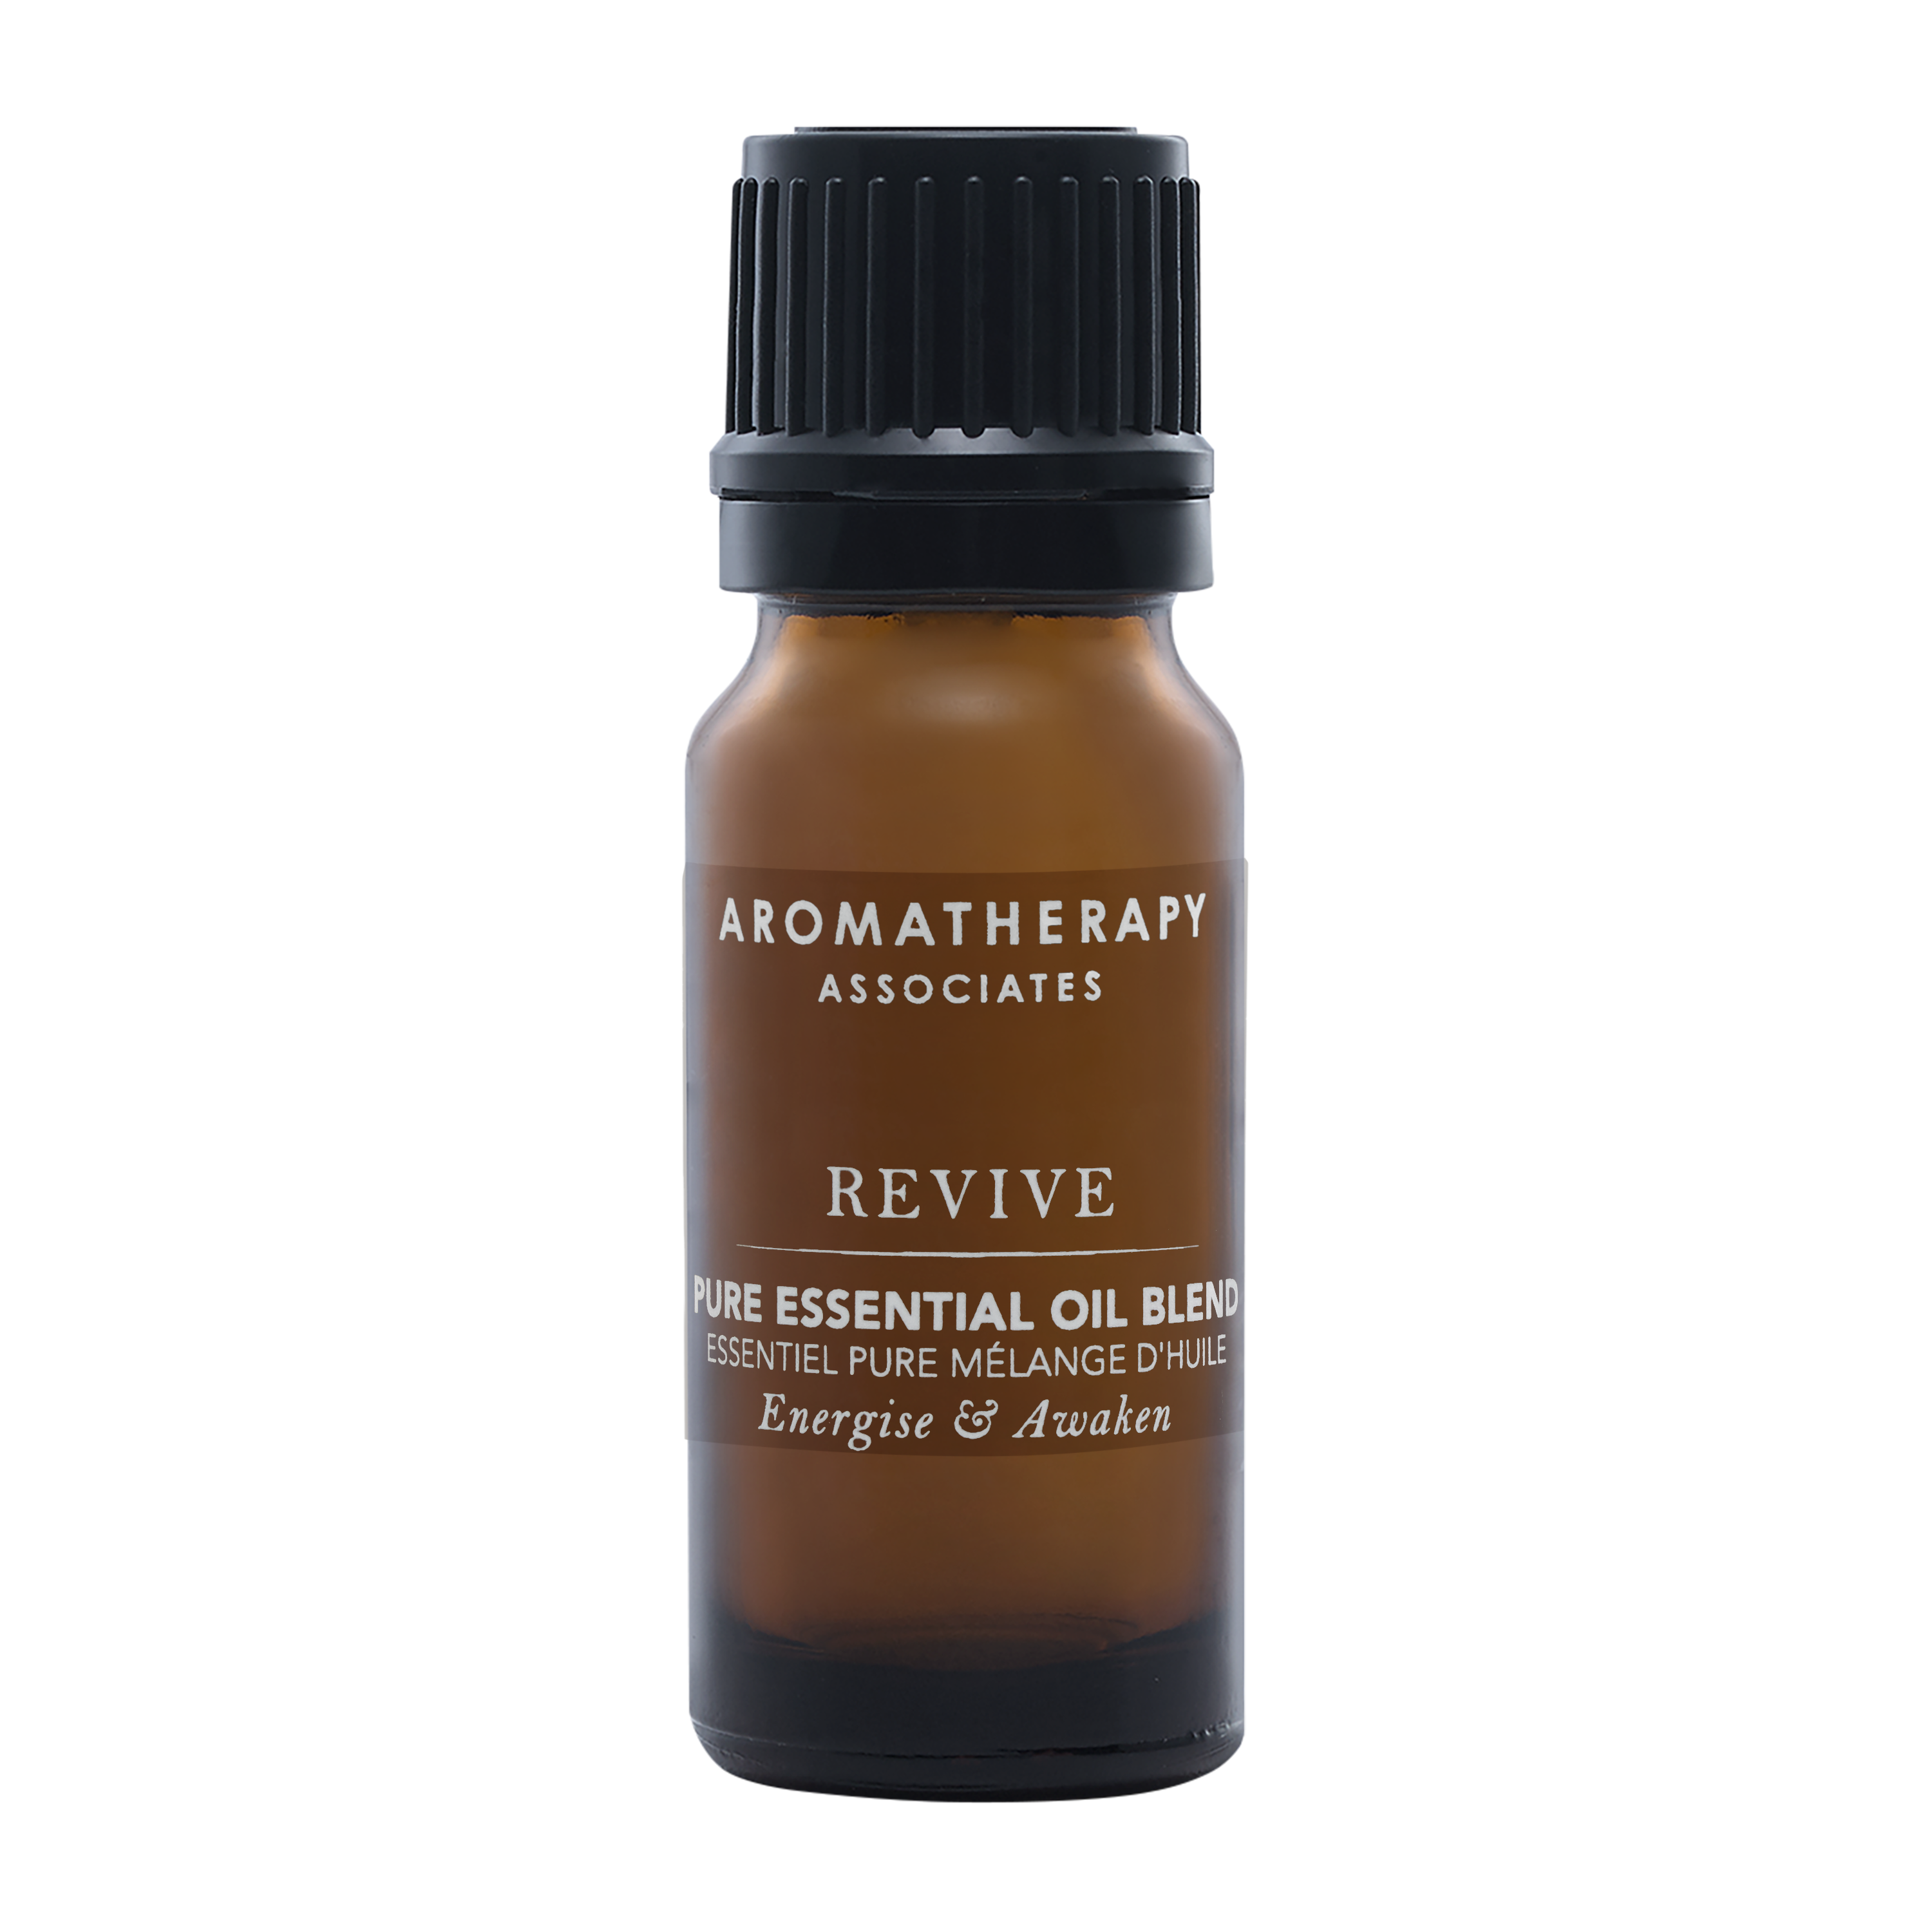 Revive Pure Essential Oil Blend Aromatherapy Associates